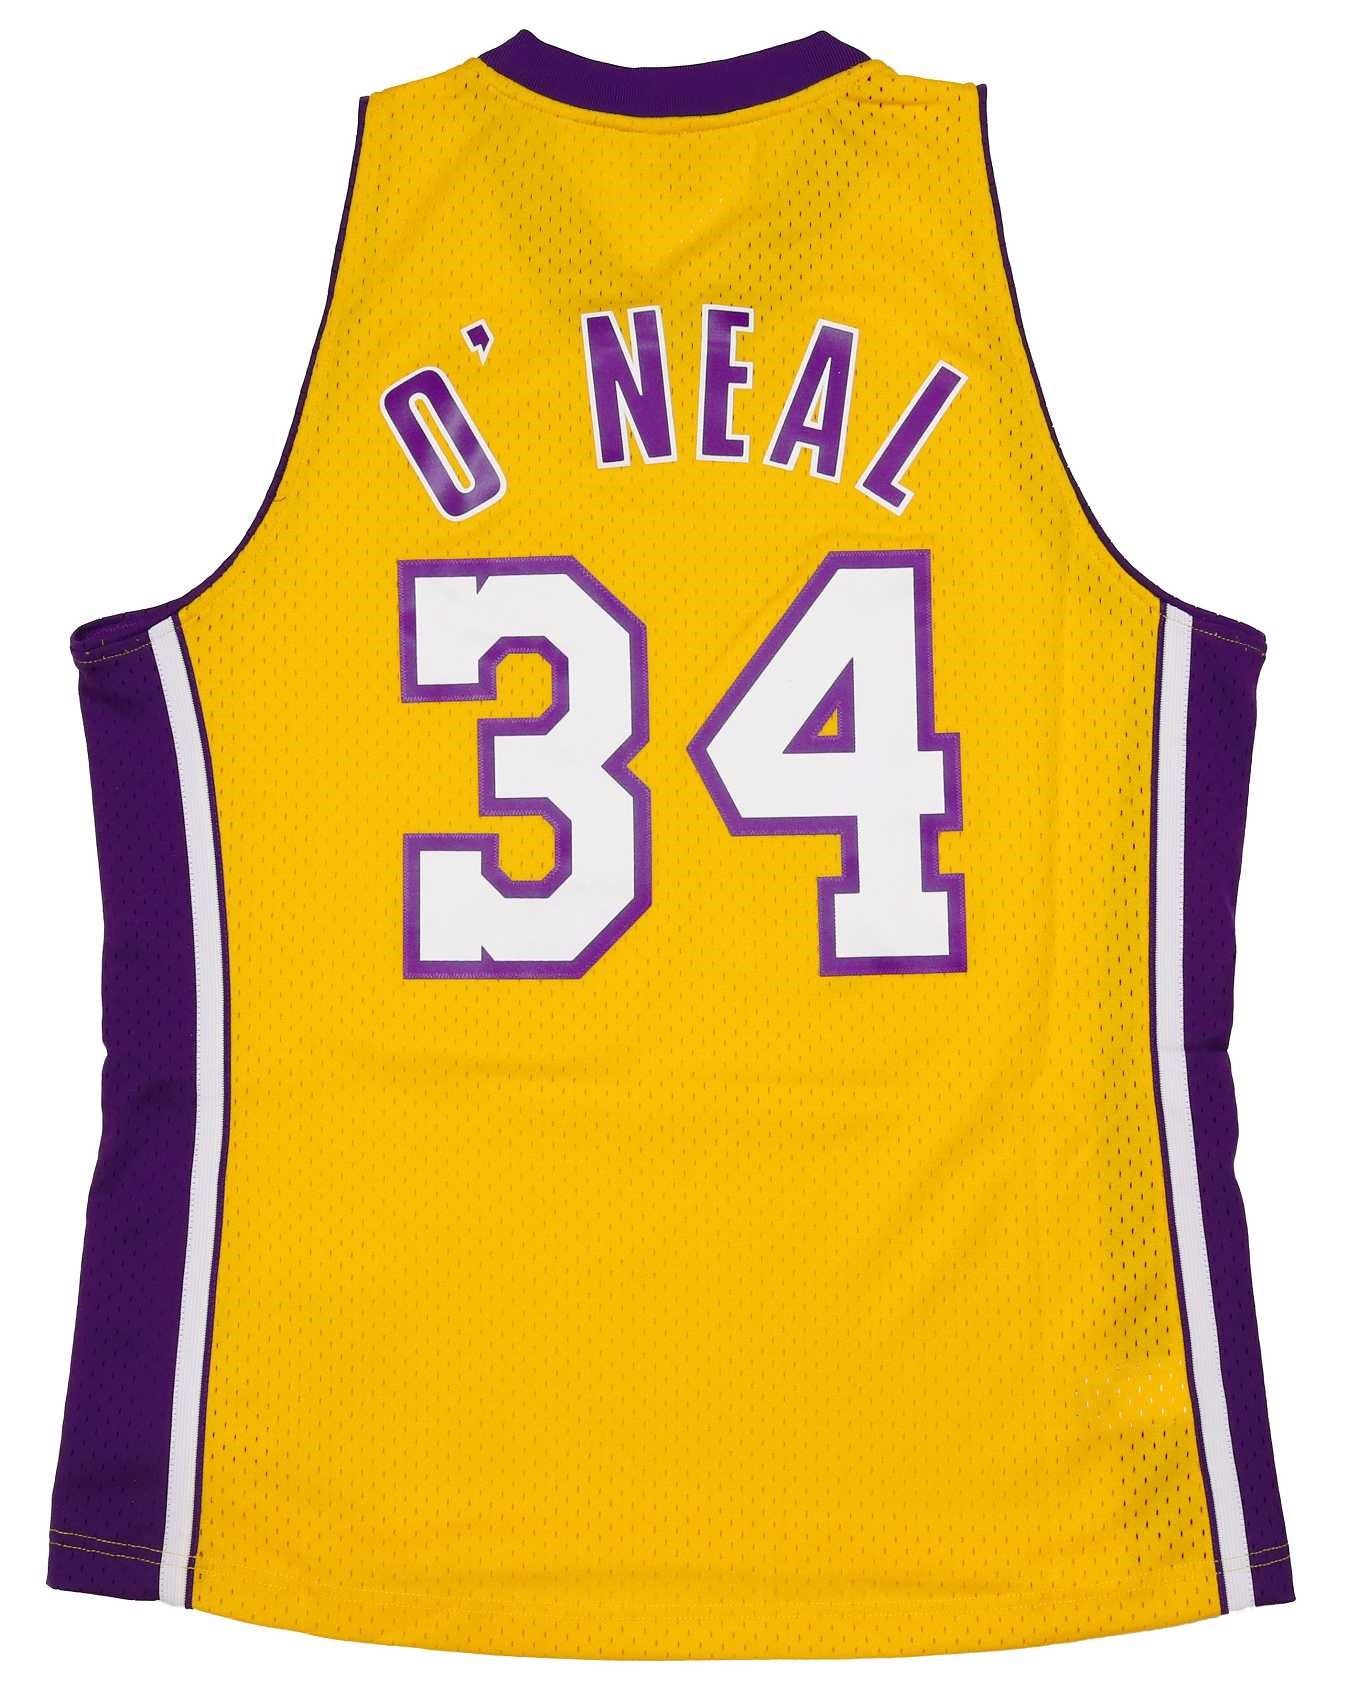 Shaquille ONeal #34 Los Angeles Lakers NBA Swingman Jersey Mitchell & Ness